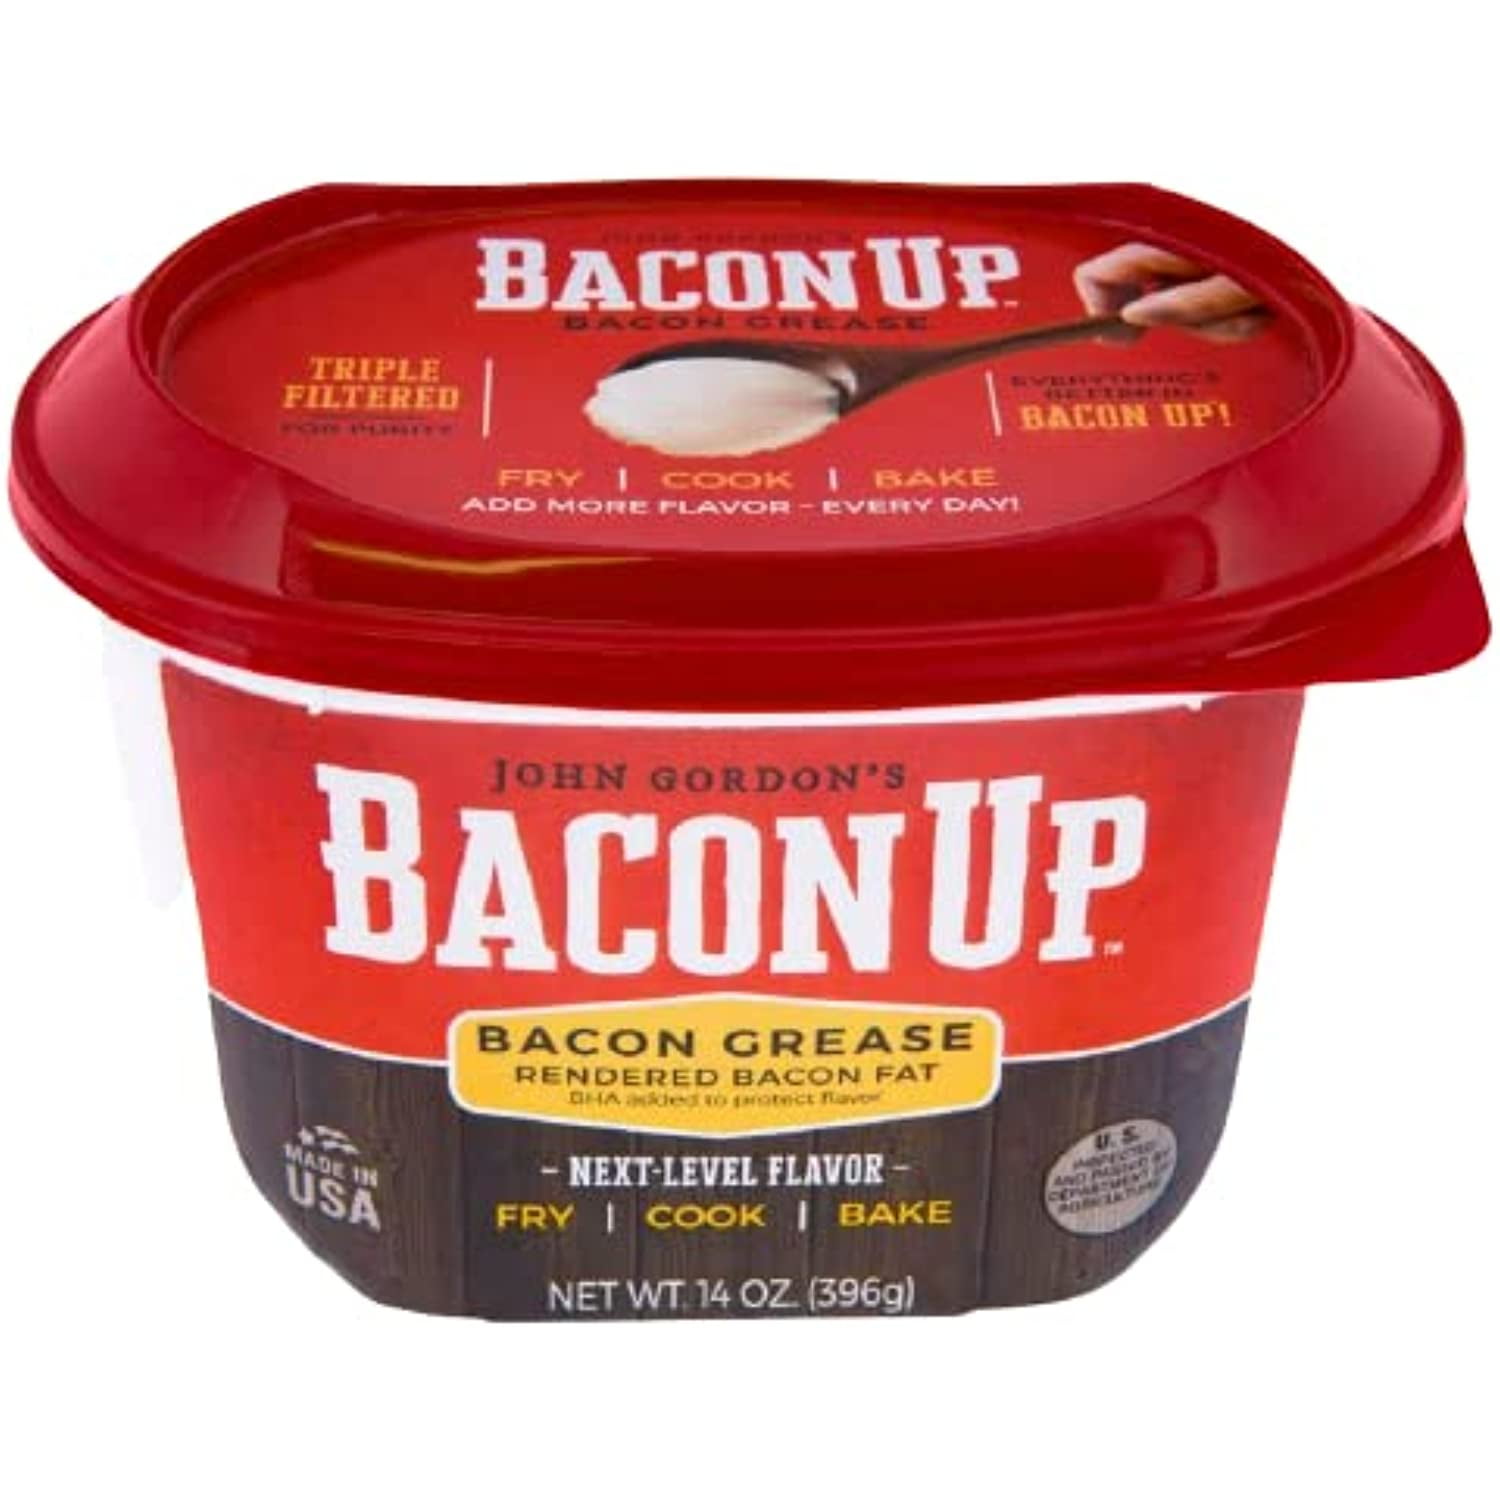  Bacon UpⓇ Bacon Grease for Cooking - 9lb Pail of Authentic  Solid Bacon Fat for Cooking, Frying and Baking - Triple-Filtered for  Purity, No Carbs, Gluten-Free and Shelf-Stable : Grocery